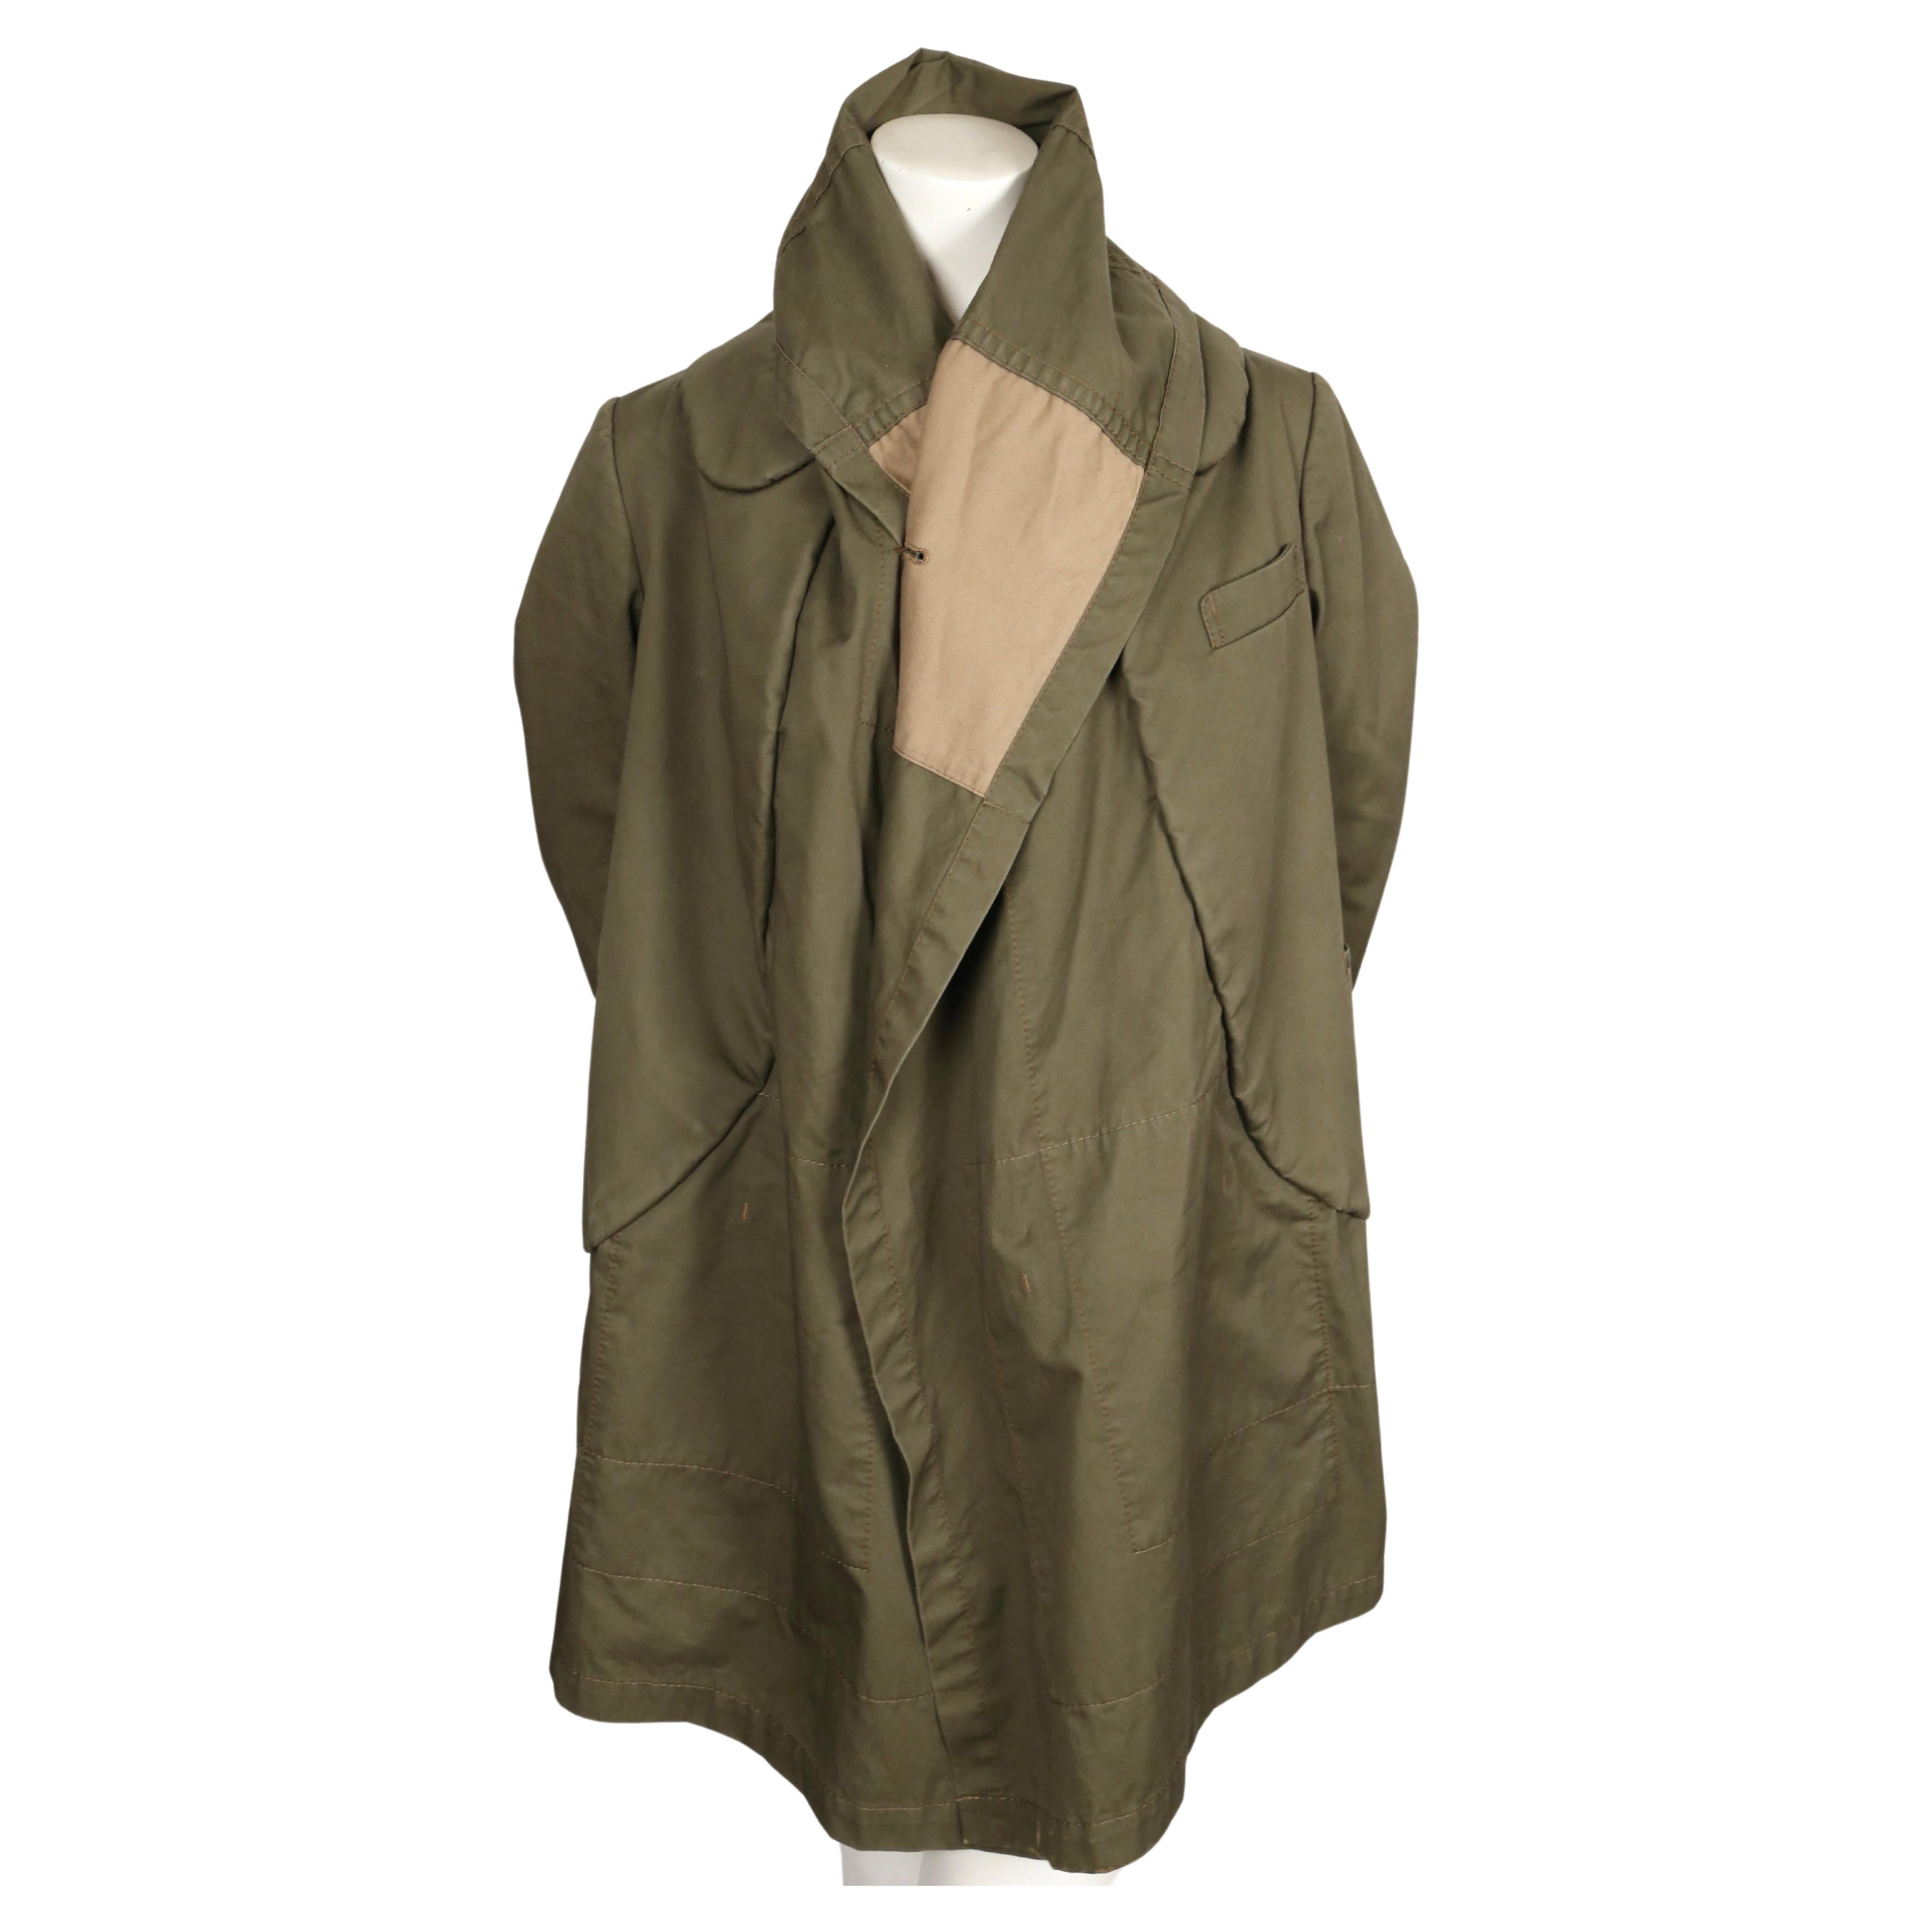 Very unique, army-green cotton coat with cropped sleeves from Comme Des Garcons exactly as seen on the fall 2009 runway. Appears as a coat worn over another coat in a classic 'visual pun' form from Rei Kawakubo for Comme Des Garcons.  Can be worn